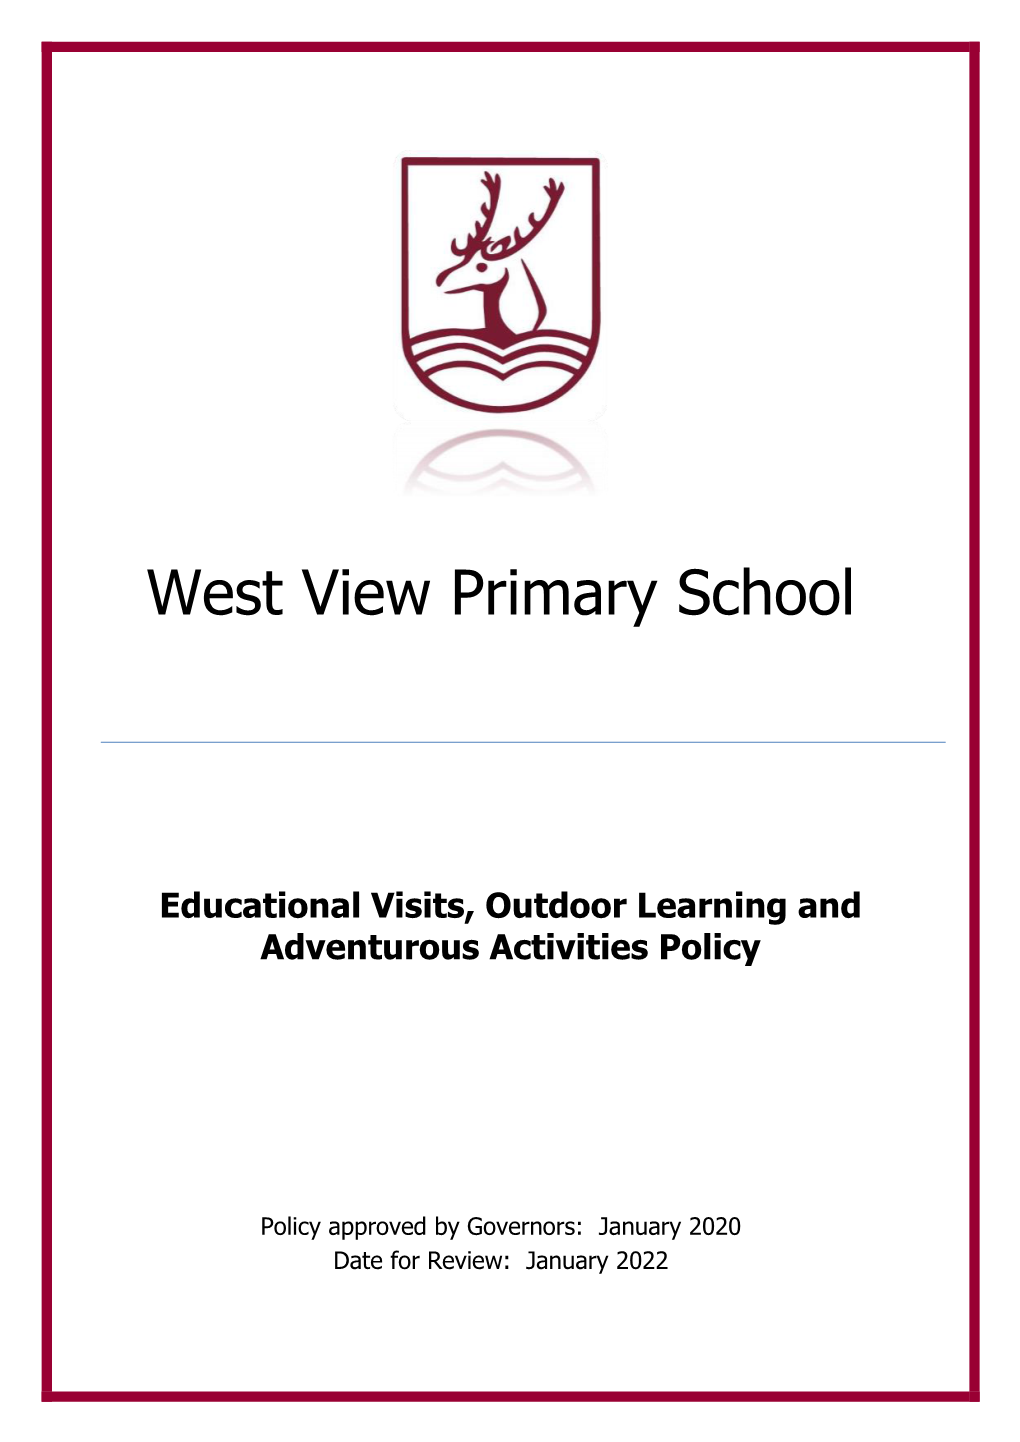 Educational Visits, Outdoor Learning and Adventurous Activities Policy